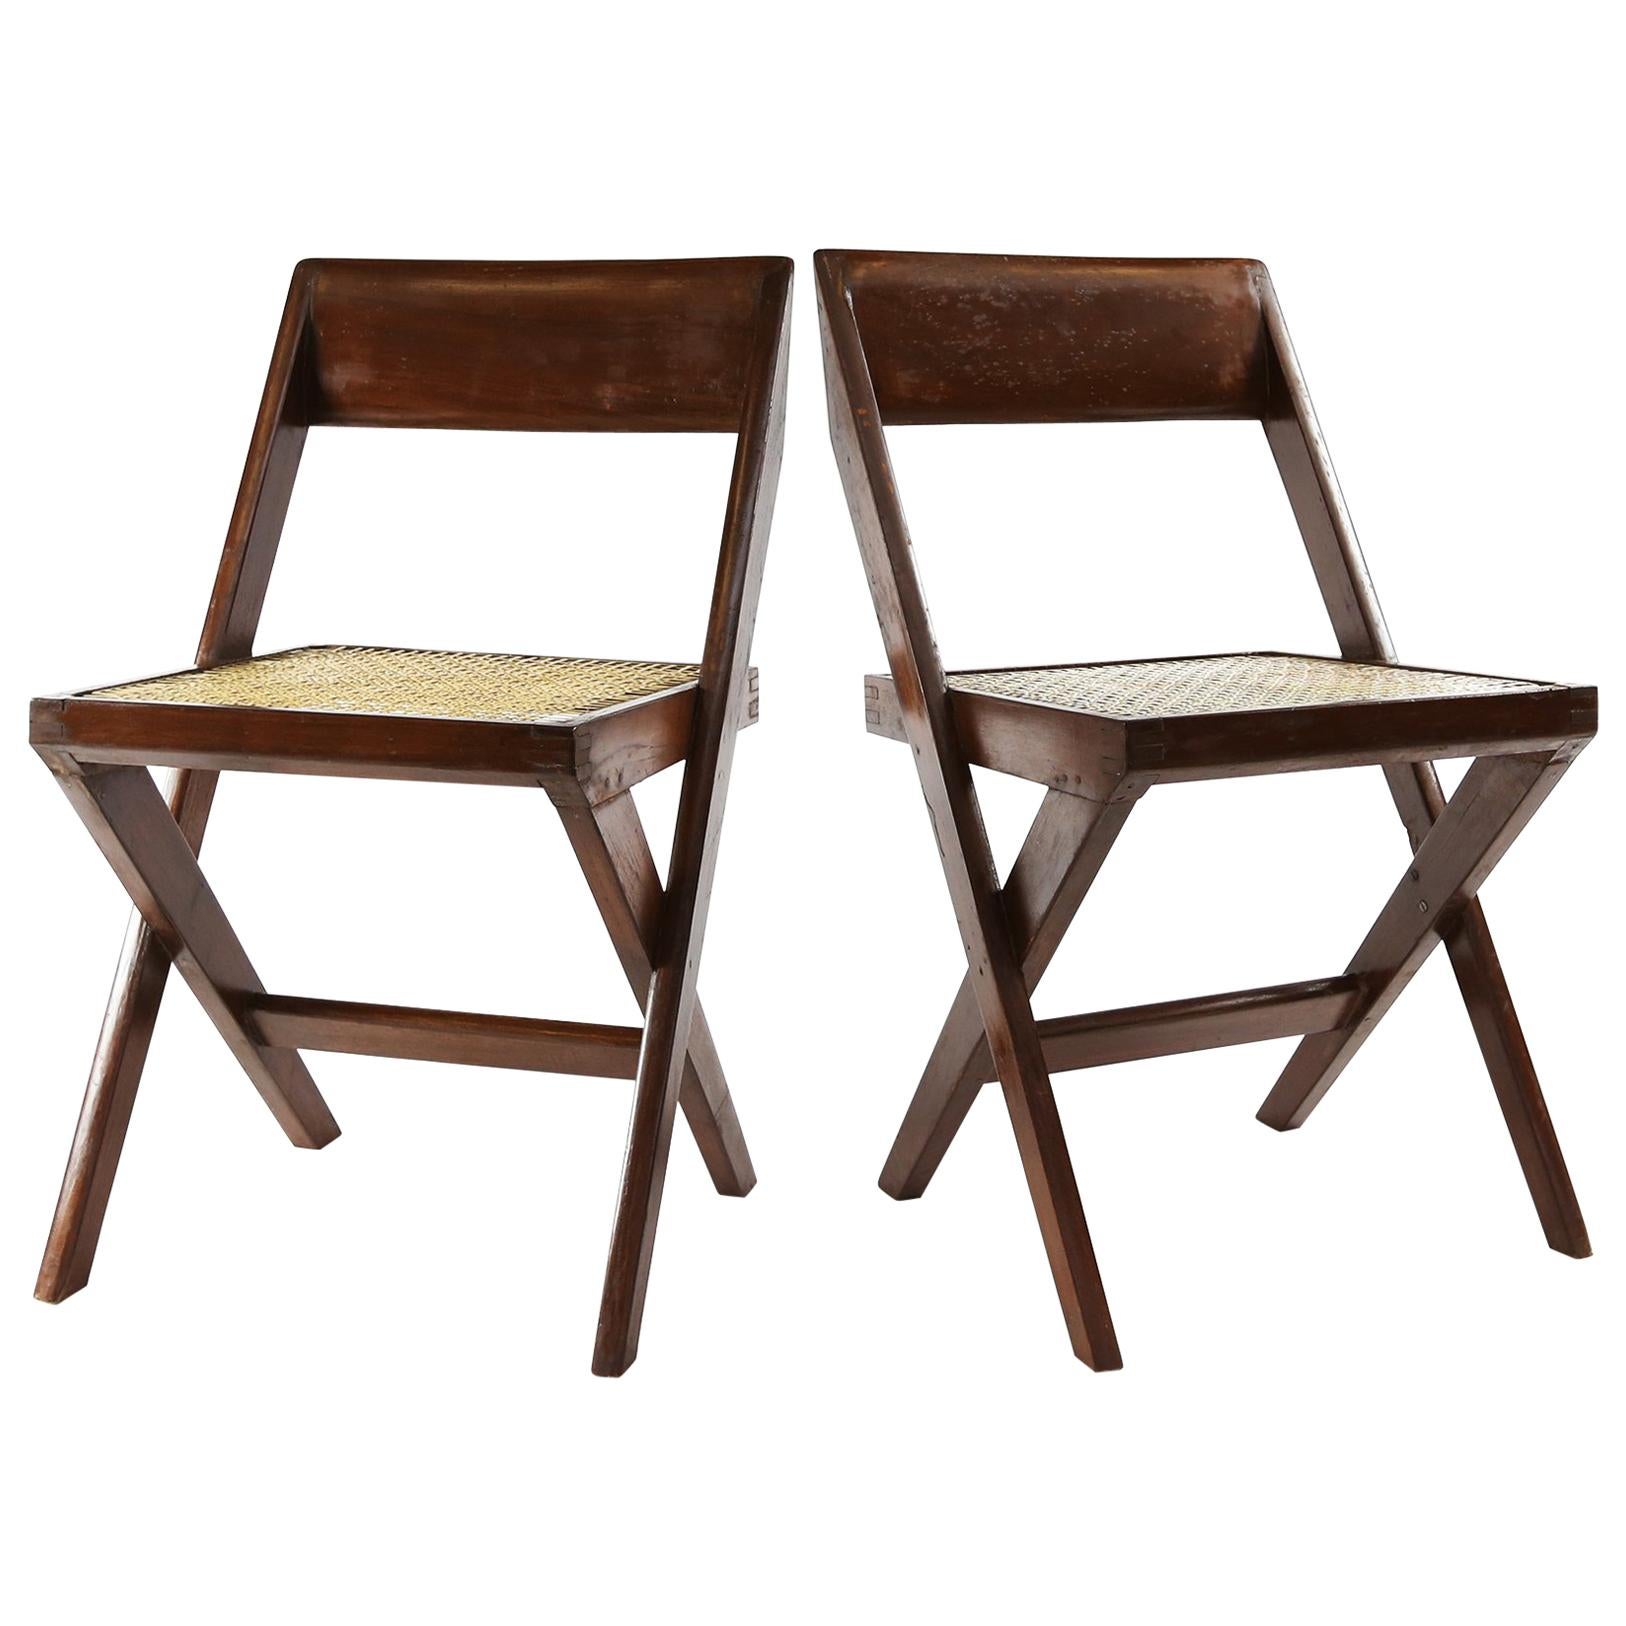 Pierre Jeanneret Library Chairs from Chandigarh, 1960s For Sale